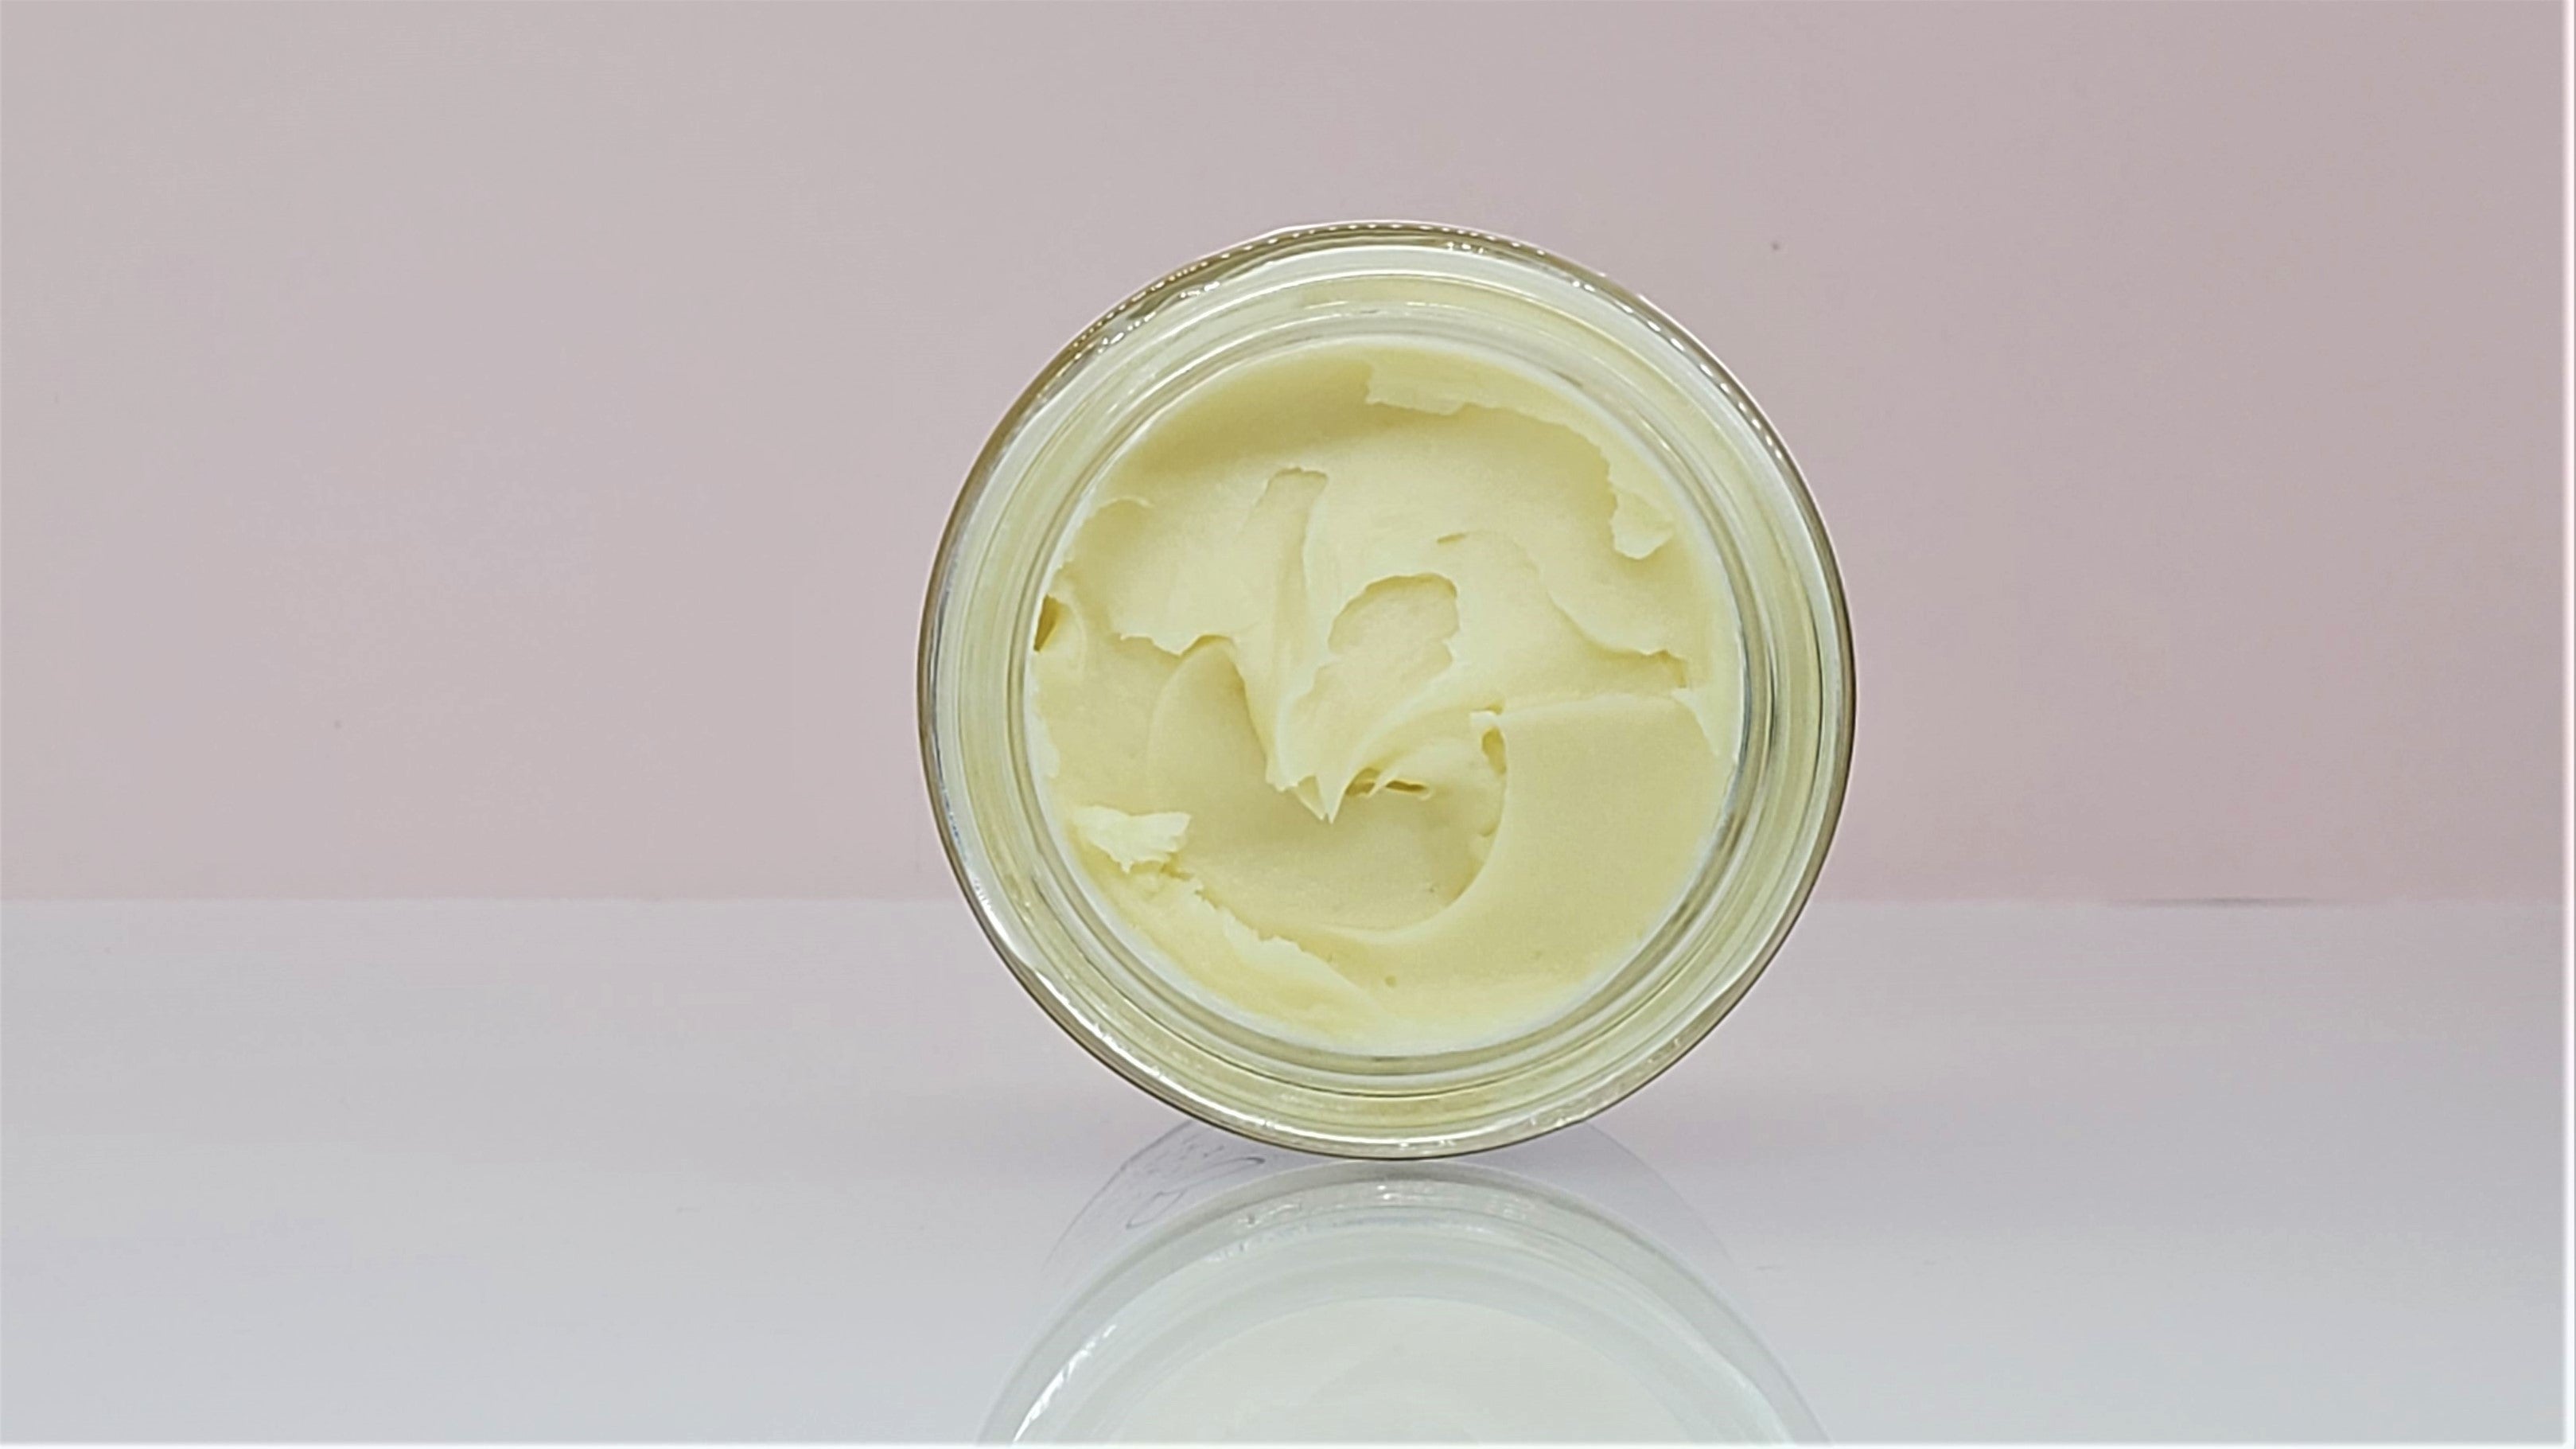 Whipped Body Butters & Salves from Aromanthi Clean Beauty, Wellness and Aromatherapy shop. Find ingredients in these products like coconut oil, jojoba oil, cocoa butter, beeswax and shea butter. Click to shop for tension relief and dry skin.